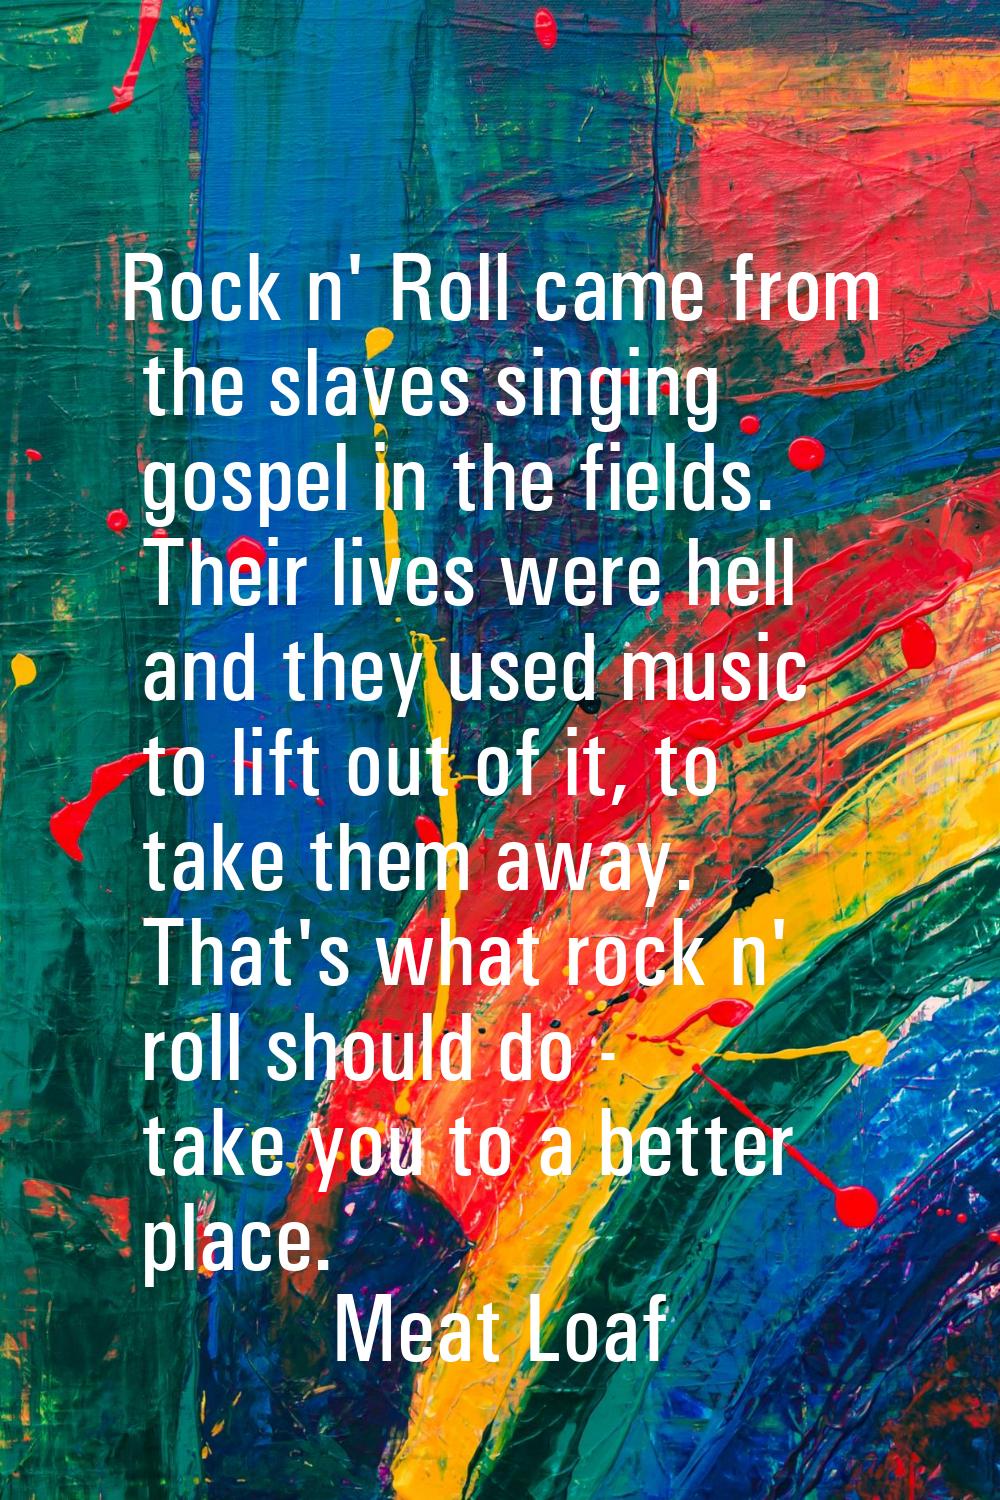 Rock n' Roll came from the slaves singing gospel in the fields. Their lives were hell and they used